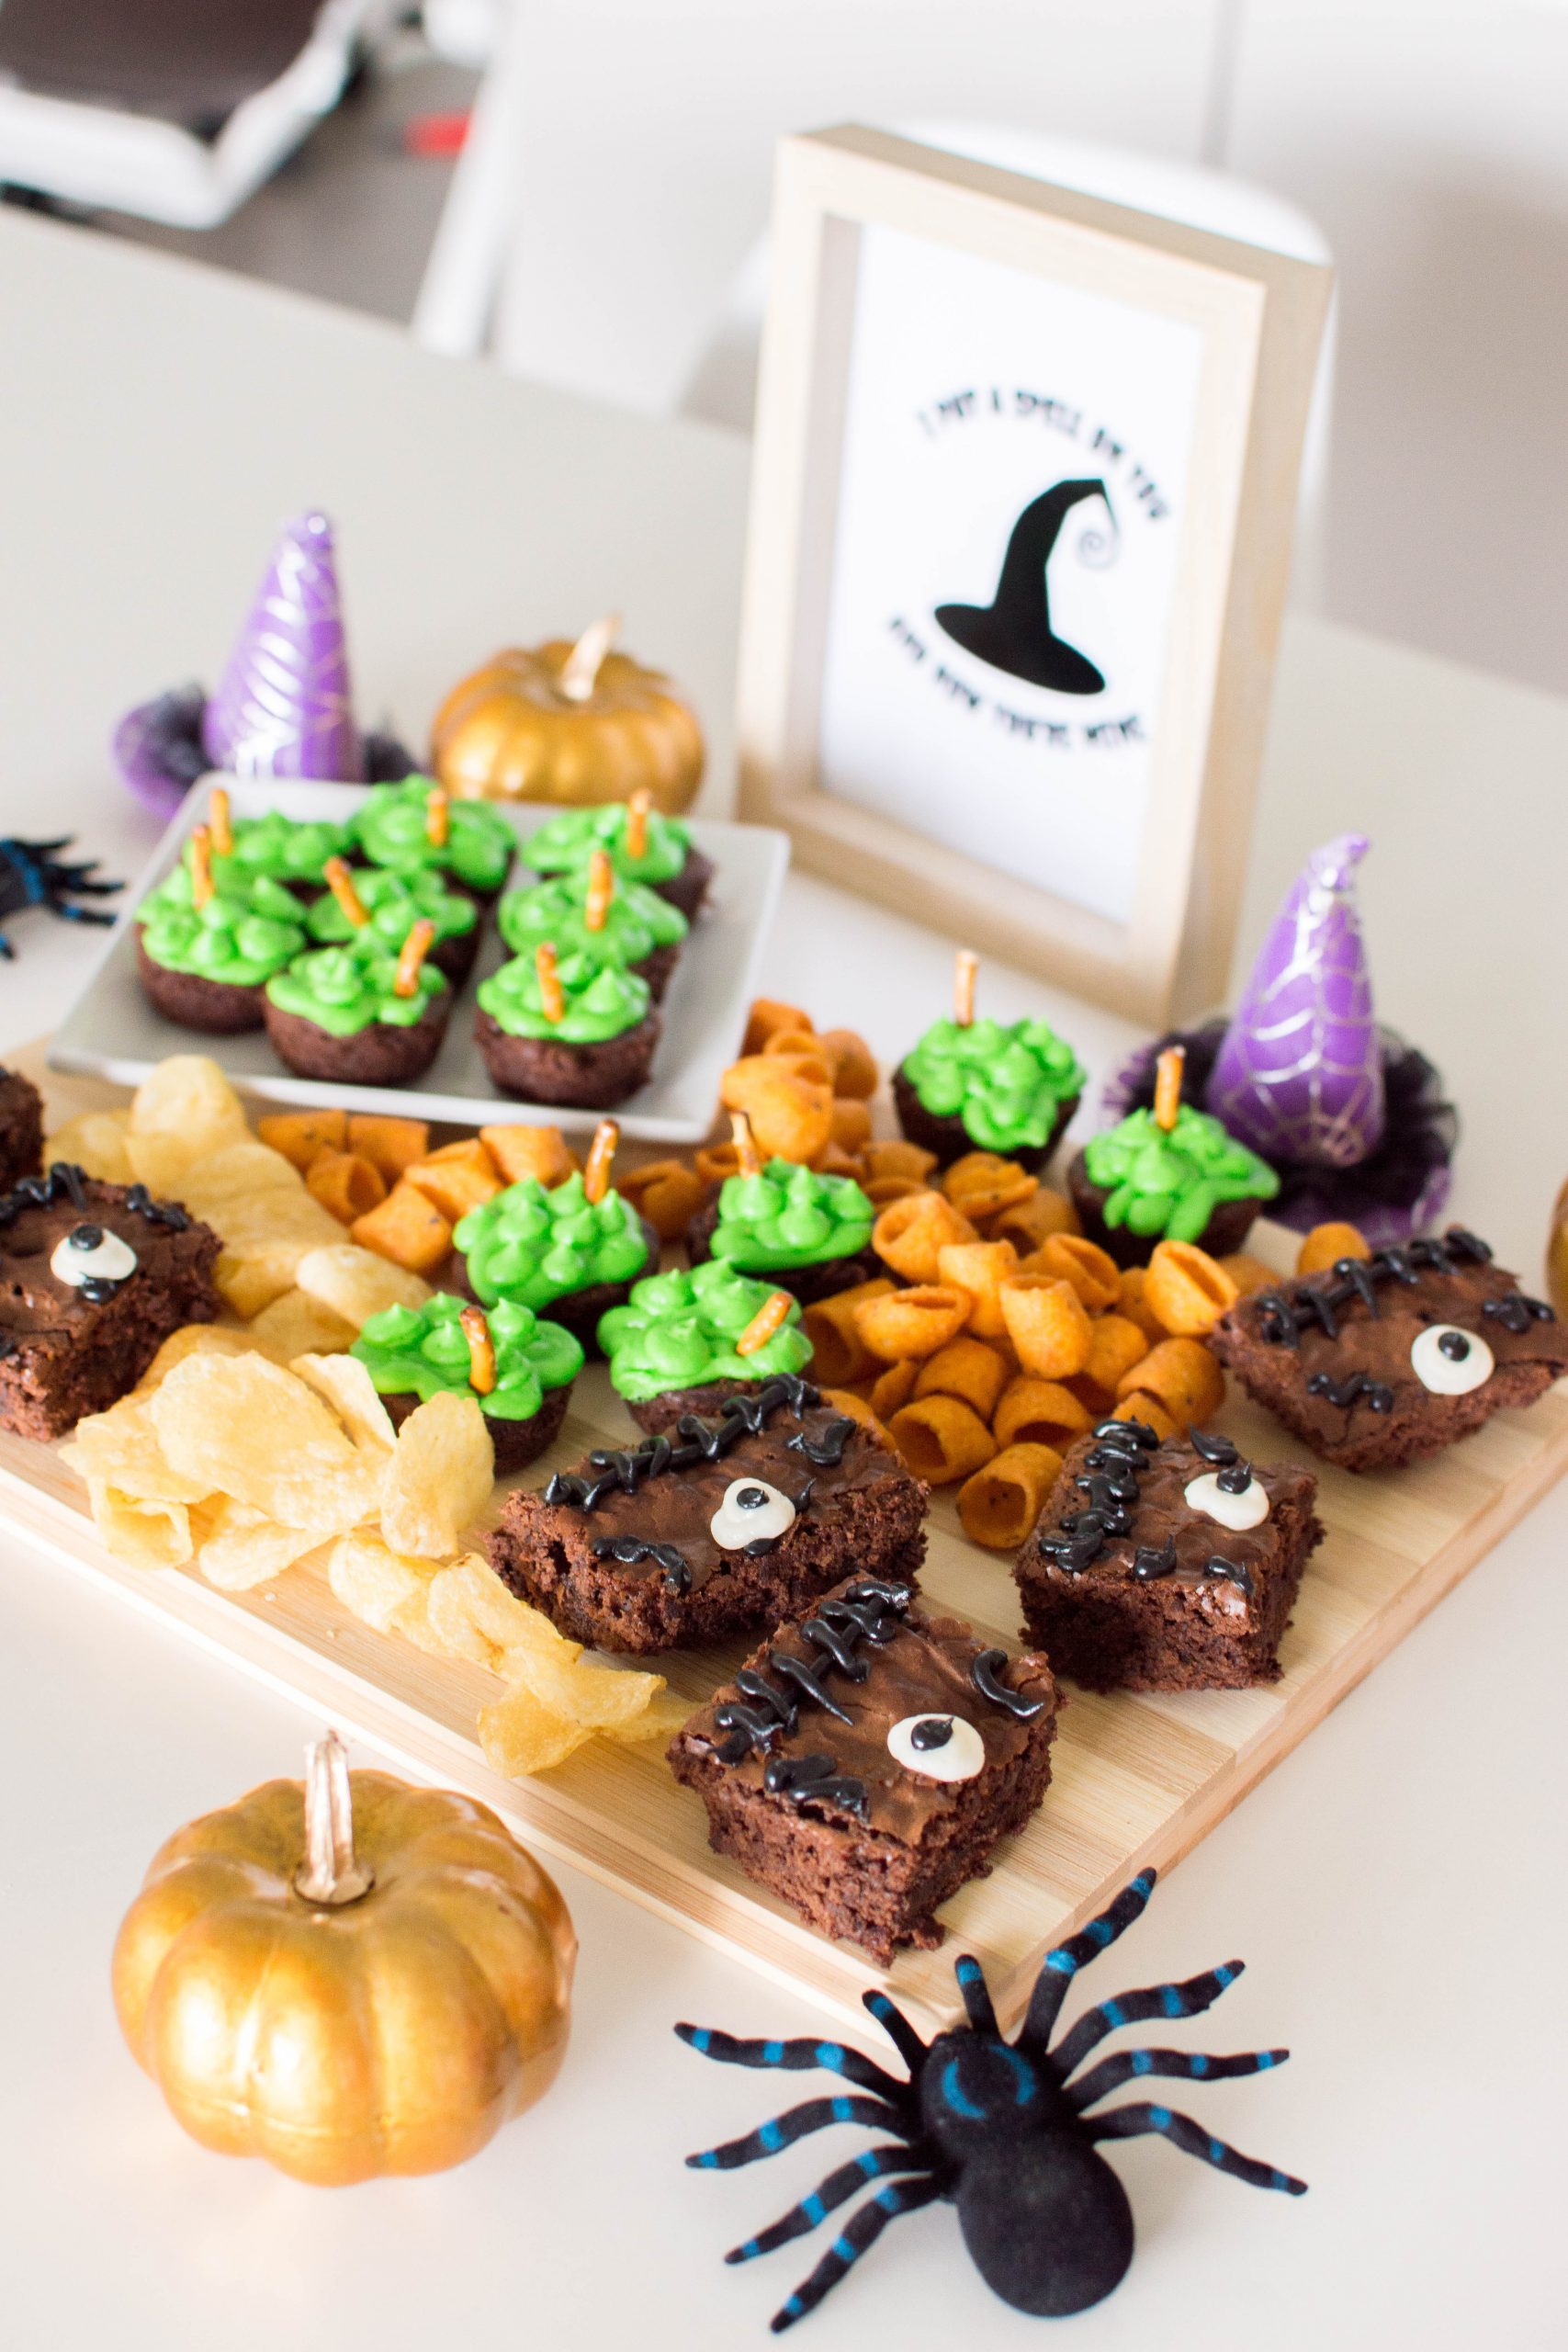 Make these Spellbook Brownies for your next Halloween party! They’re really easy to make and require minimal ingredients.